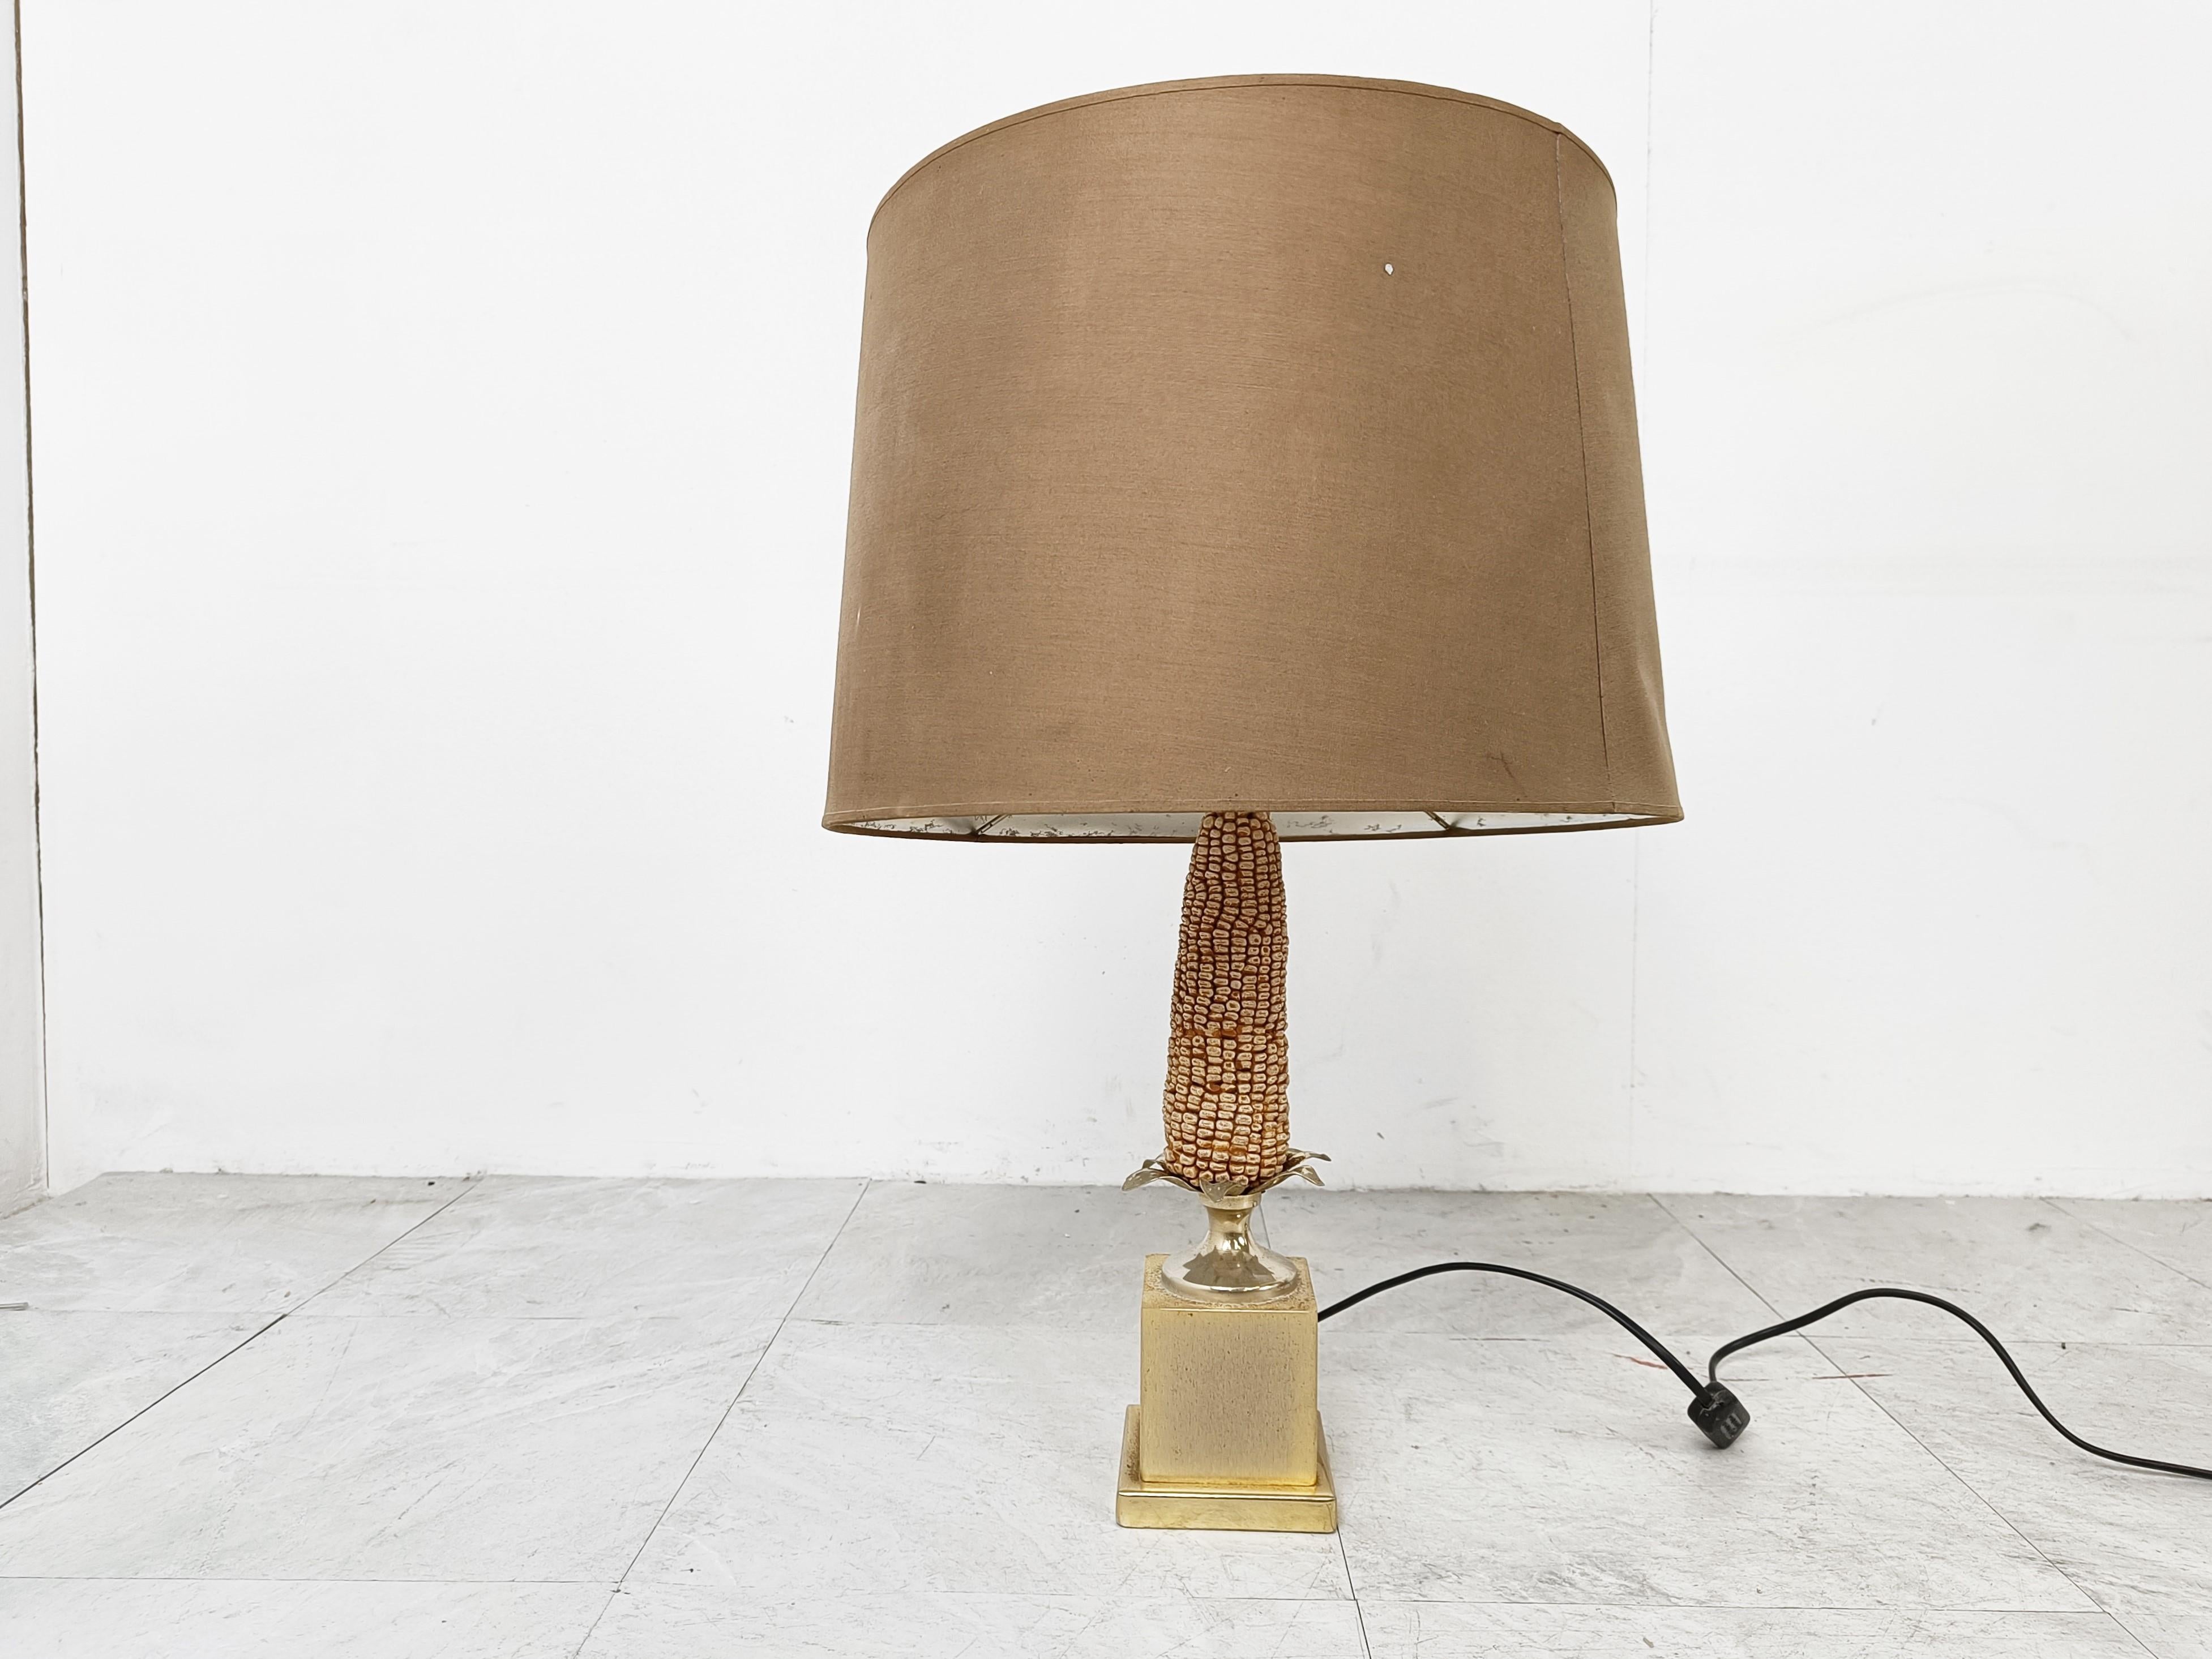 Charming corn table lamp.

The corn sculpture is made of resin and is nicely detailed.

Brass base and original lamp shade (worn inside but still very usable)

Lamp is tested and ready to use with a single E27 lightbulb. Works all over the